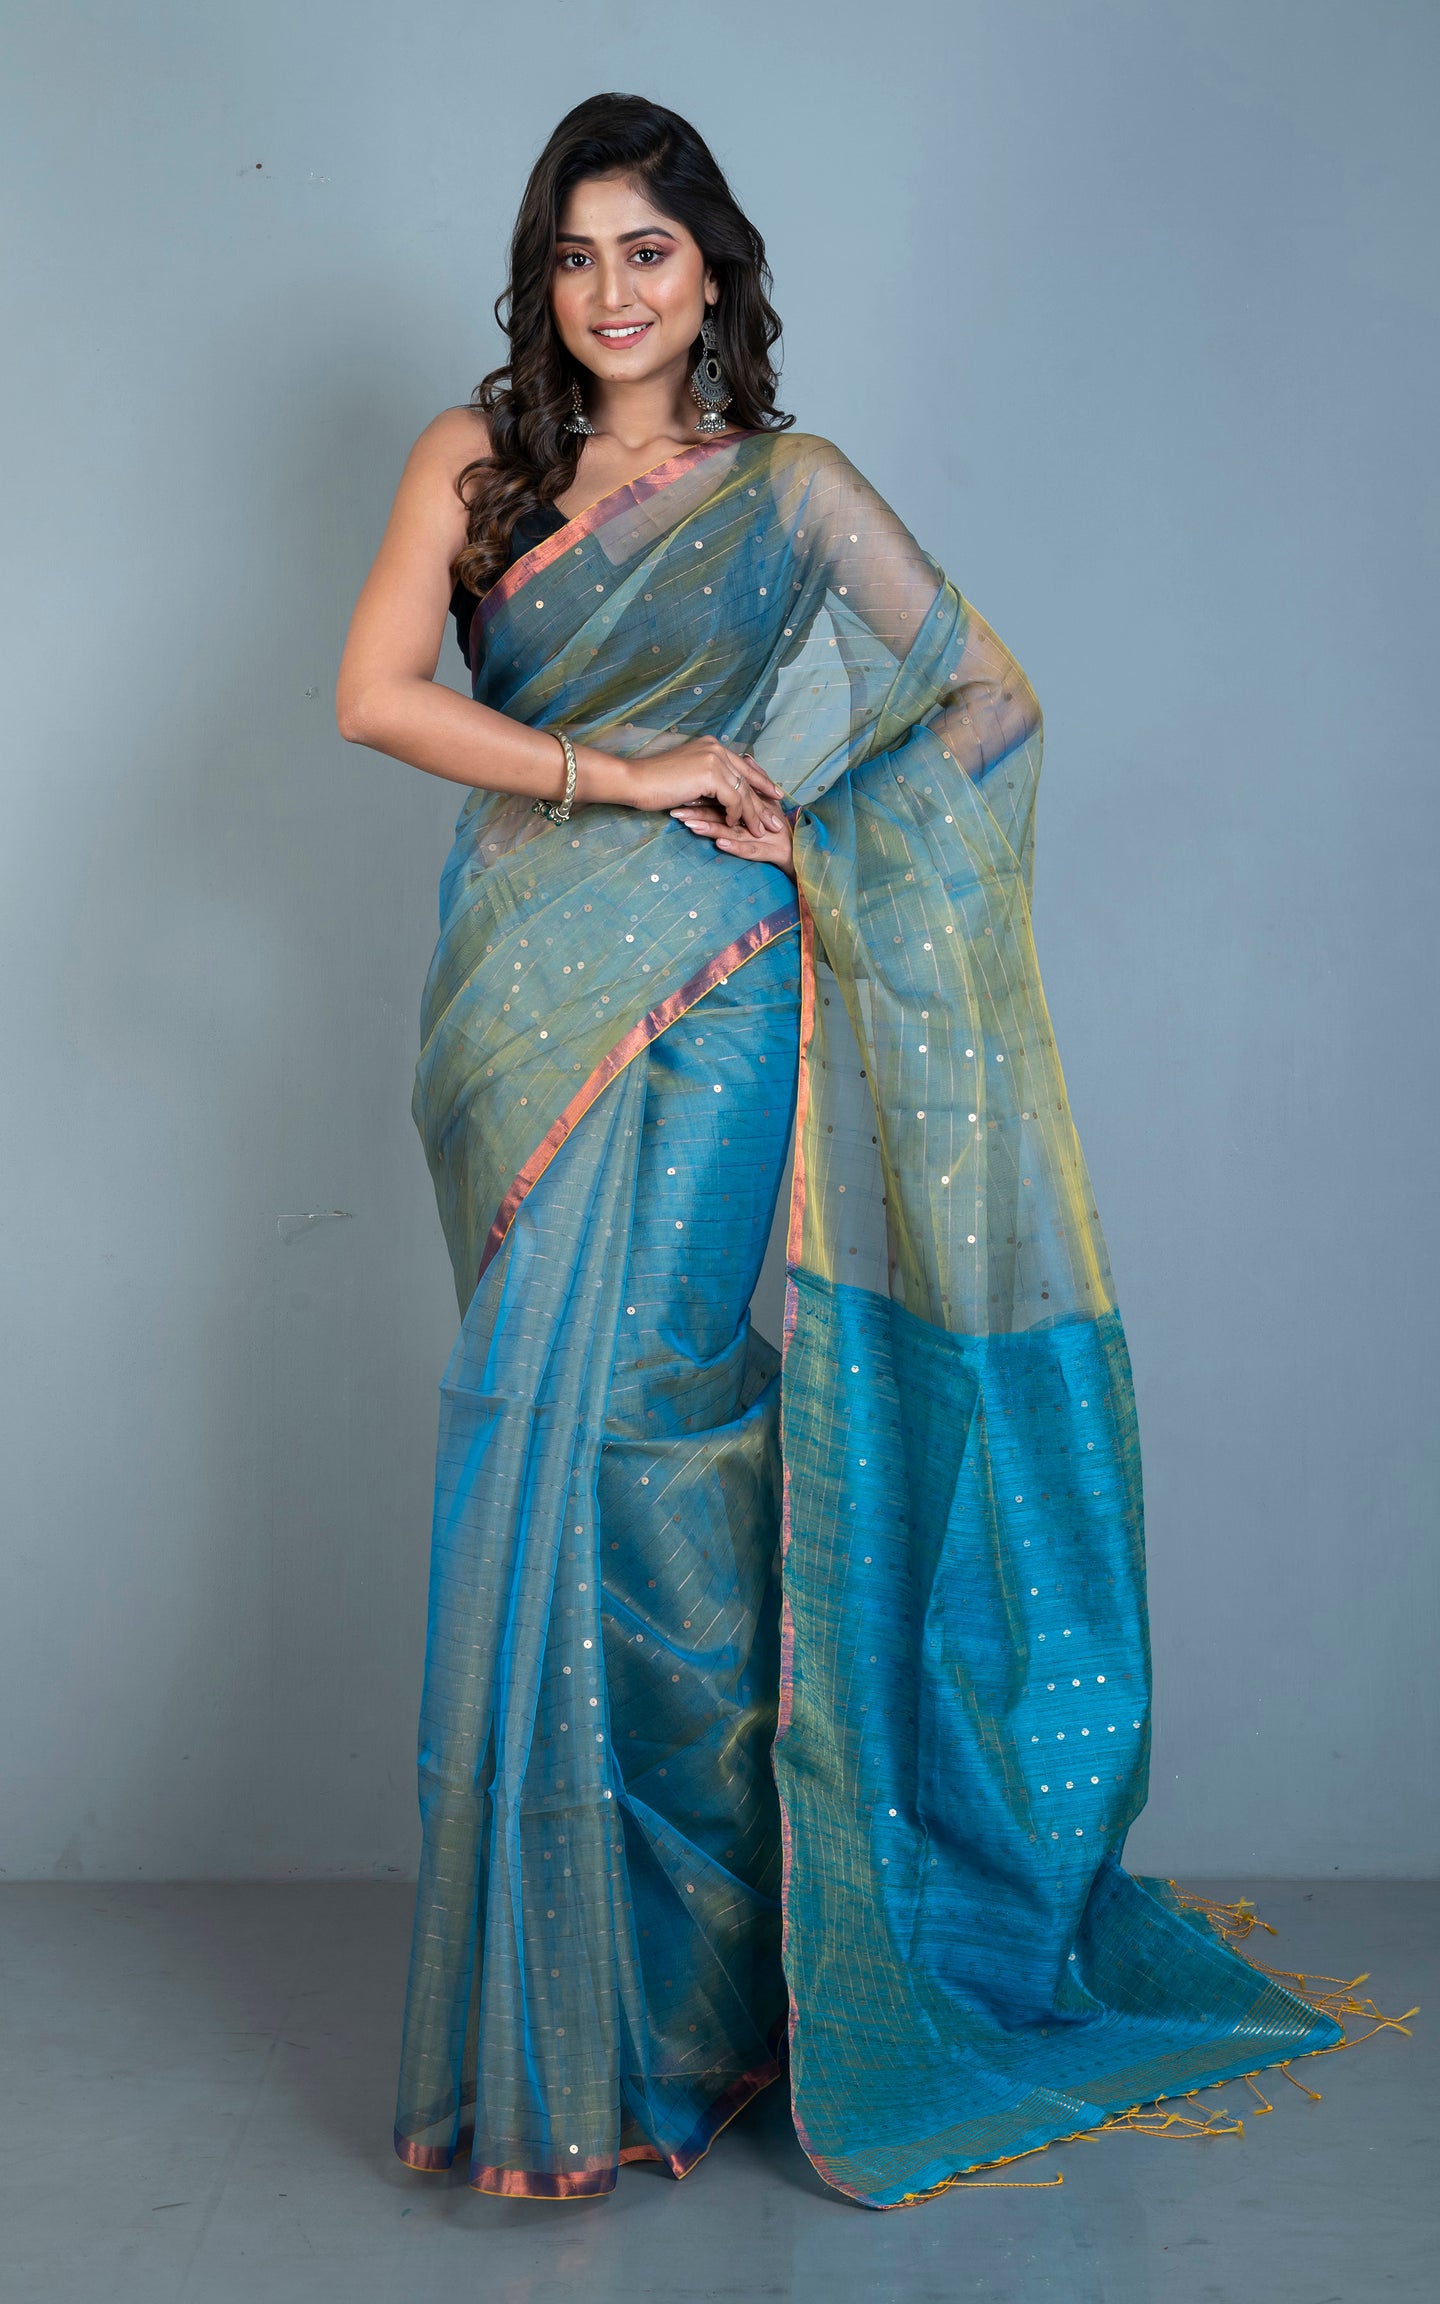 Sequin Inlaid Muslin Silk Saree with Raw Silk Pallu in Dirty Gold, Turquoise and Copper